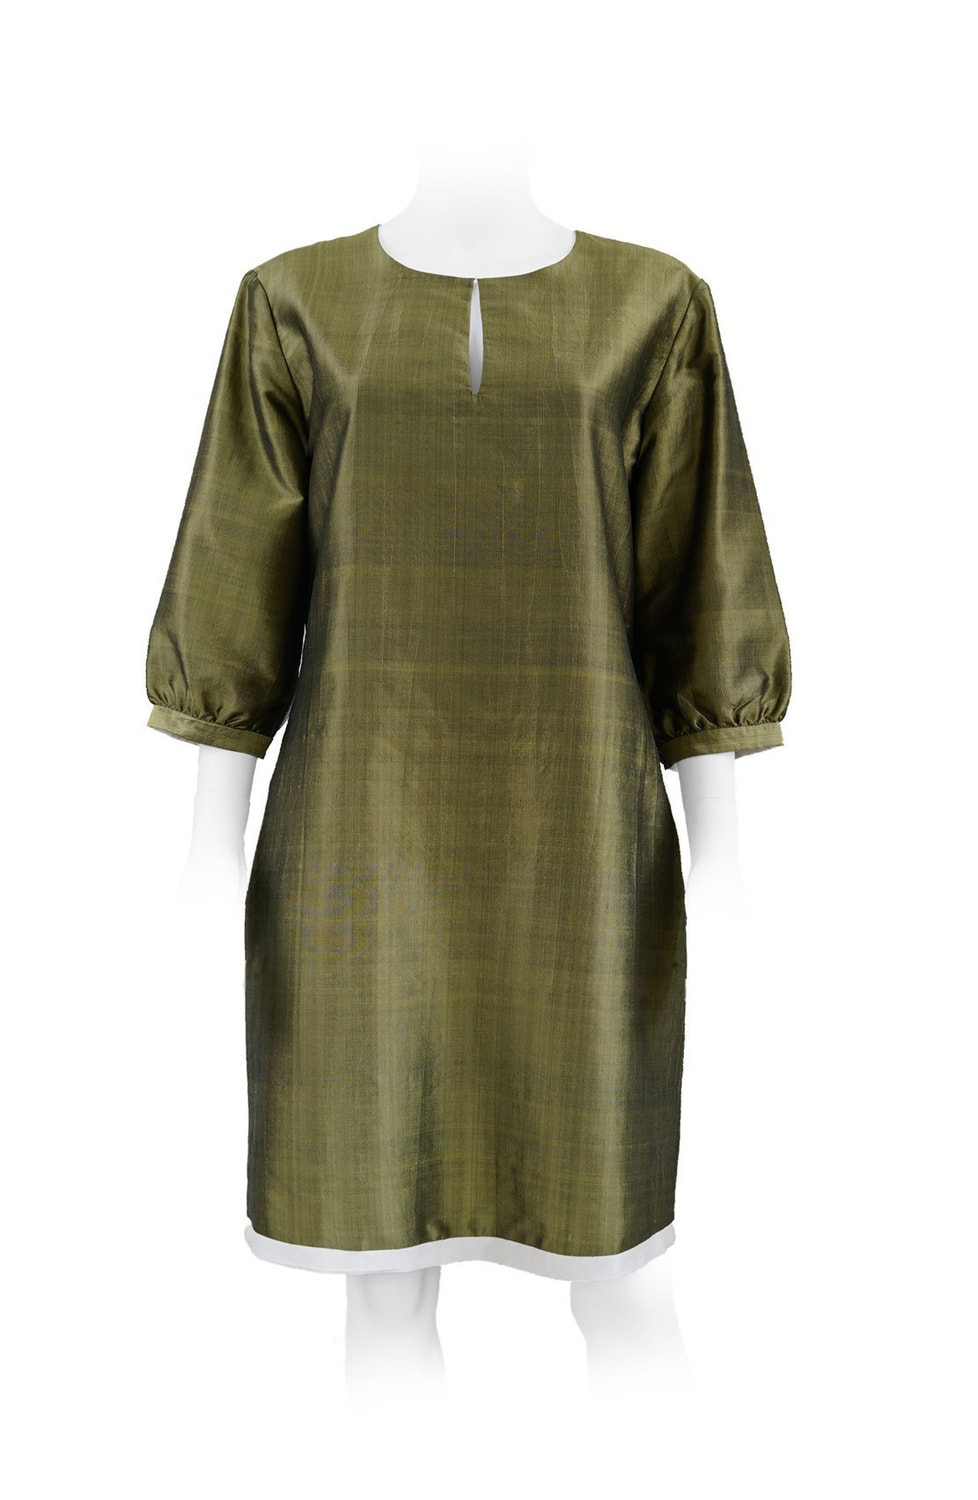 khaki and white pure silk dress, lined with white silk, handmade in Cambodia